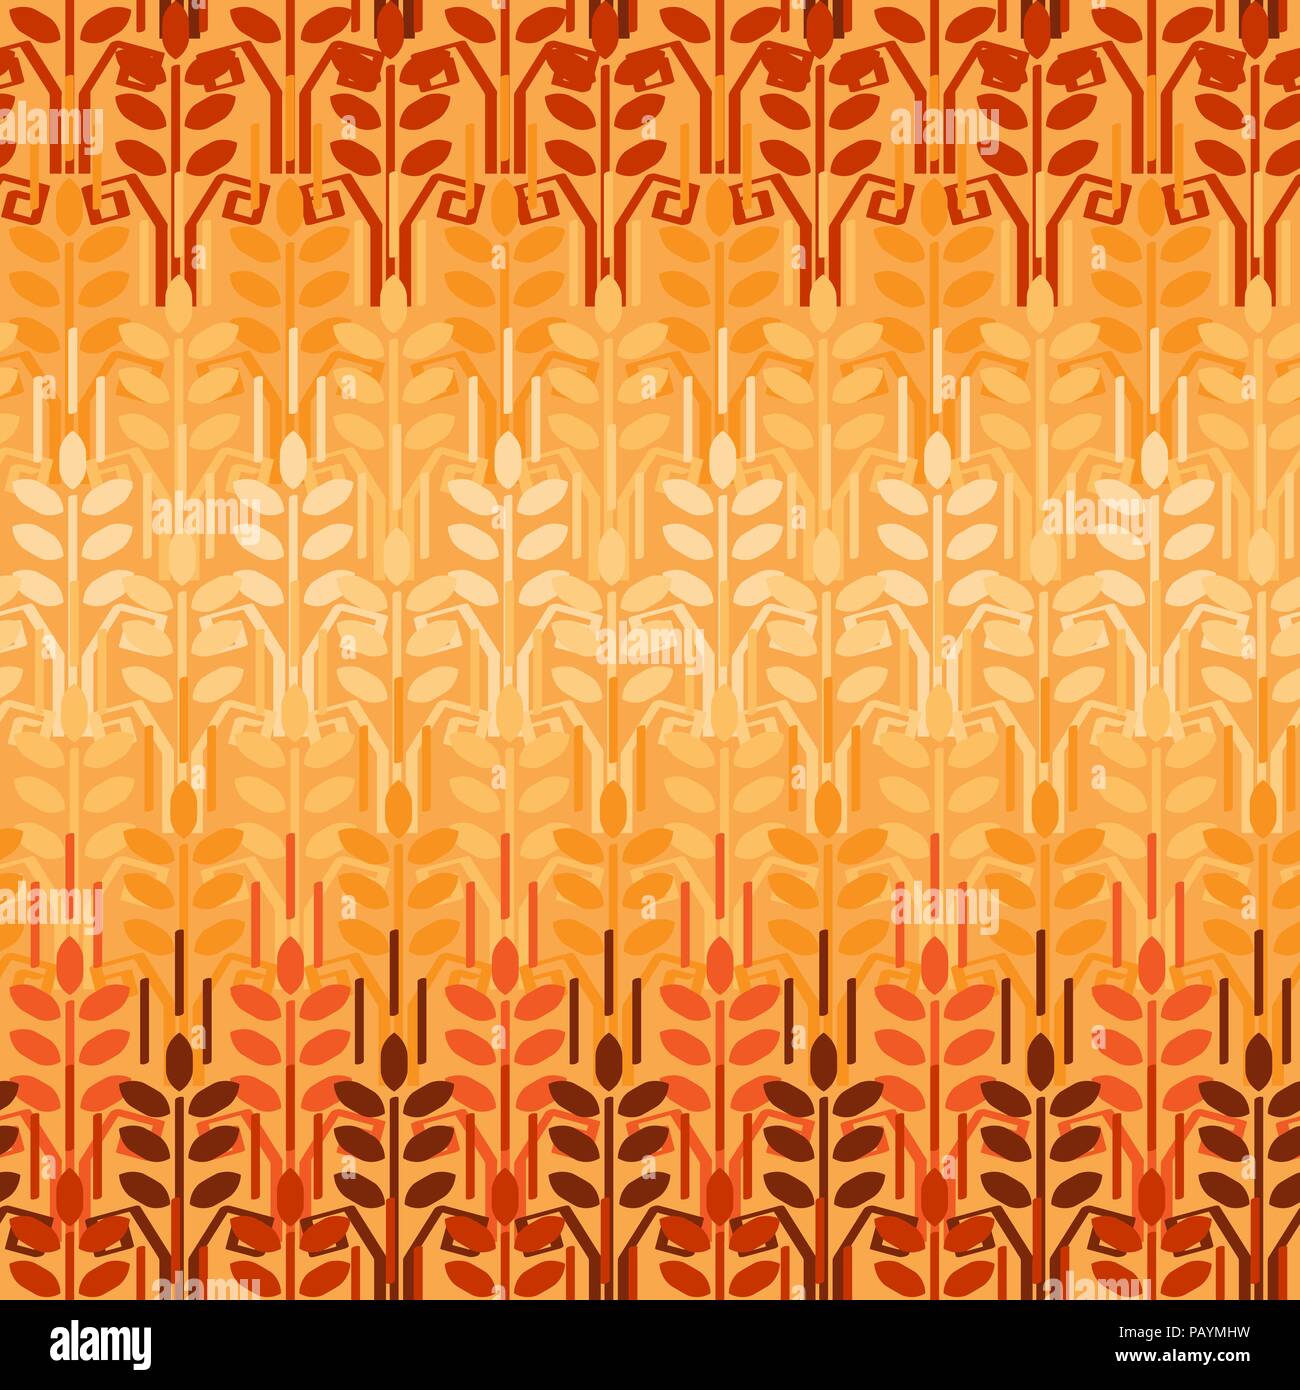 Wheat ears pattern. Vector agriculture background. Wheat field Stock Vector